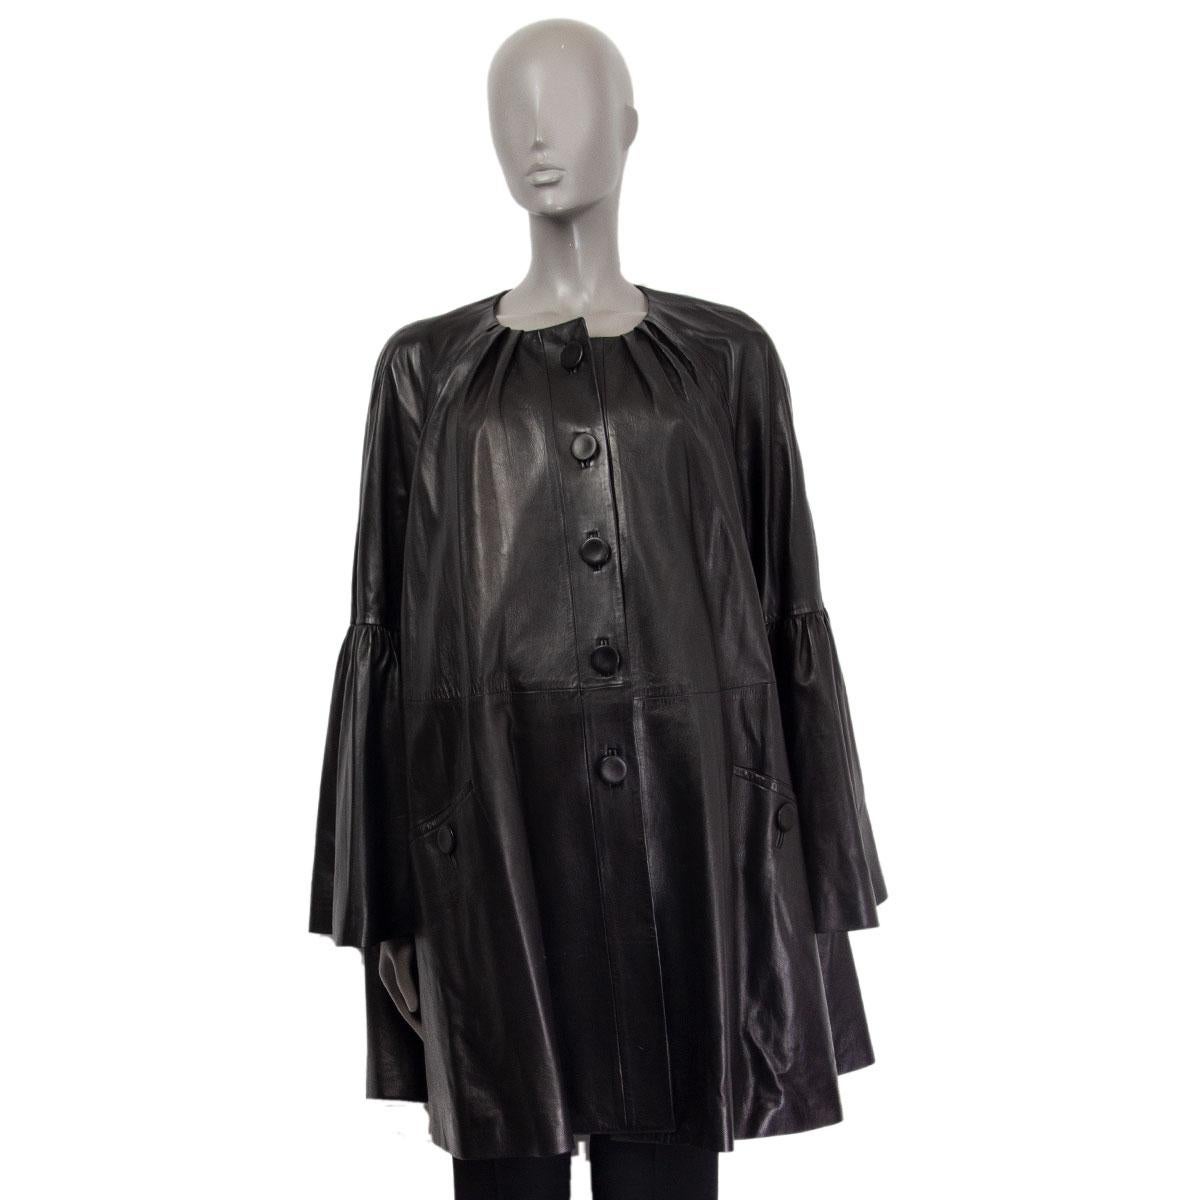 Alexander McQueen flared long-sleeves coat in black leather with a collarless neckline and two front buttoned pockets. Has an over oversize fit. Closes on the front with buttons. Lined in silk (100%). Has been worn and is in excellent condition. 